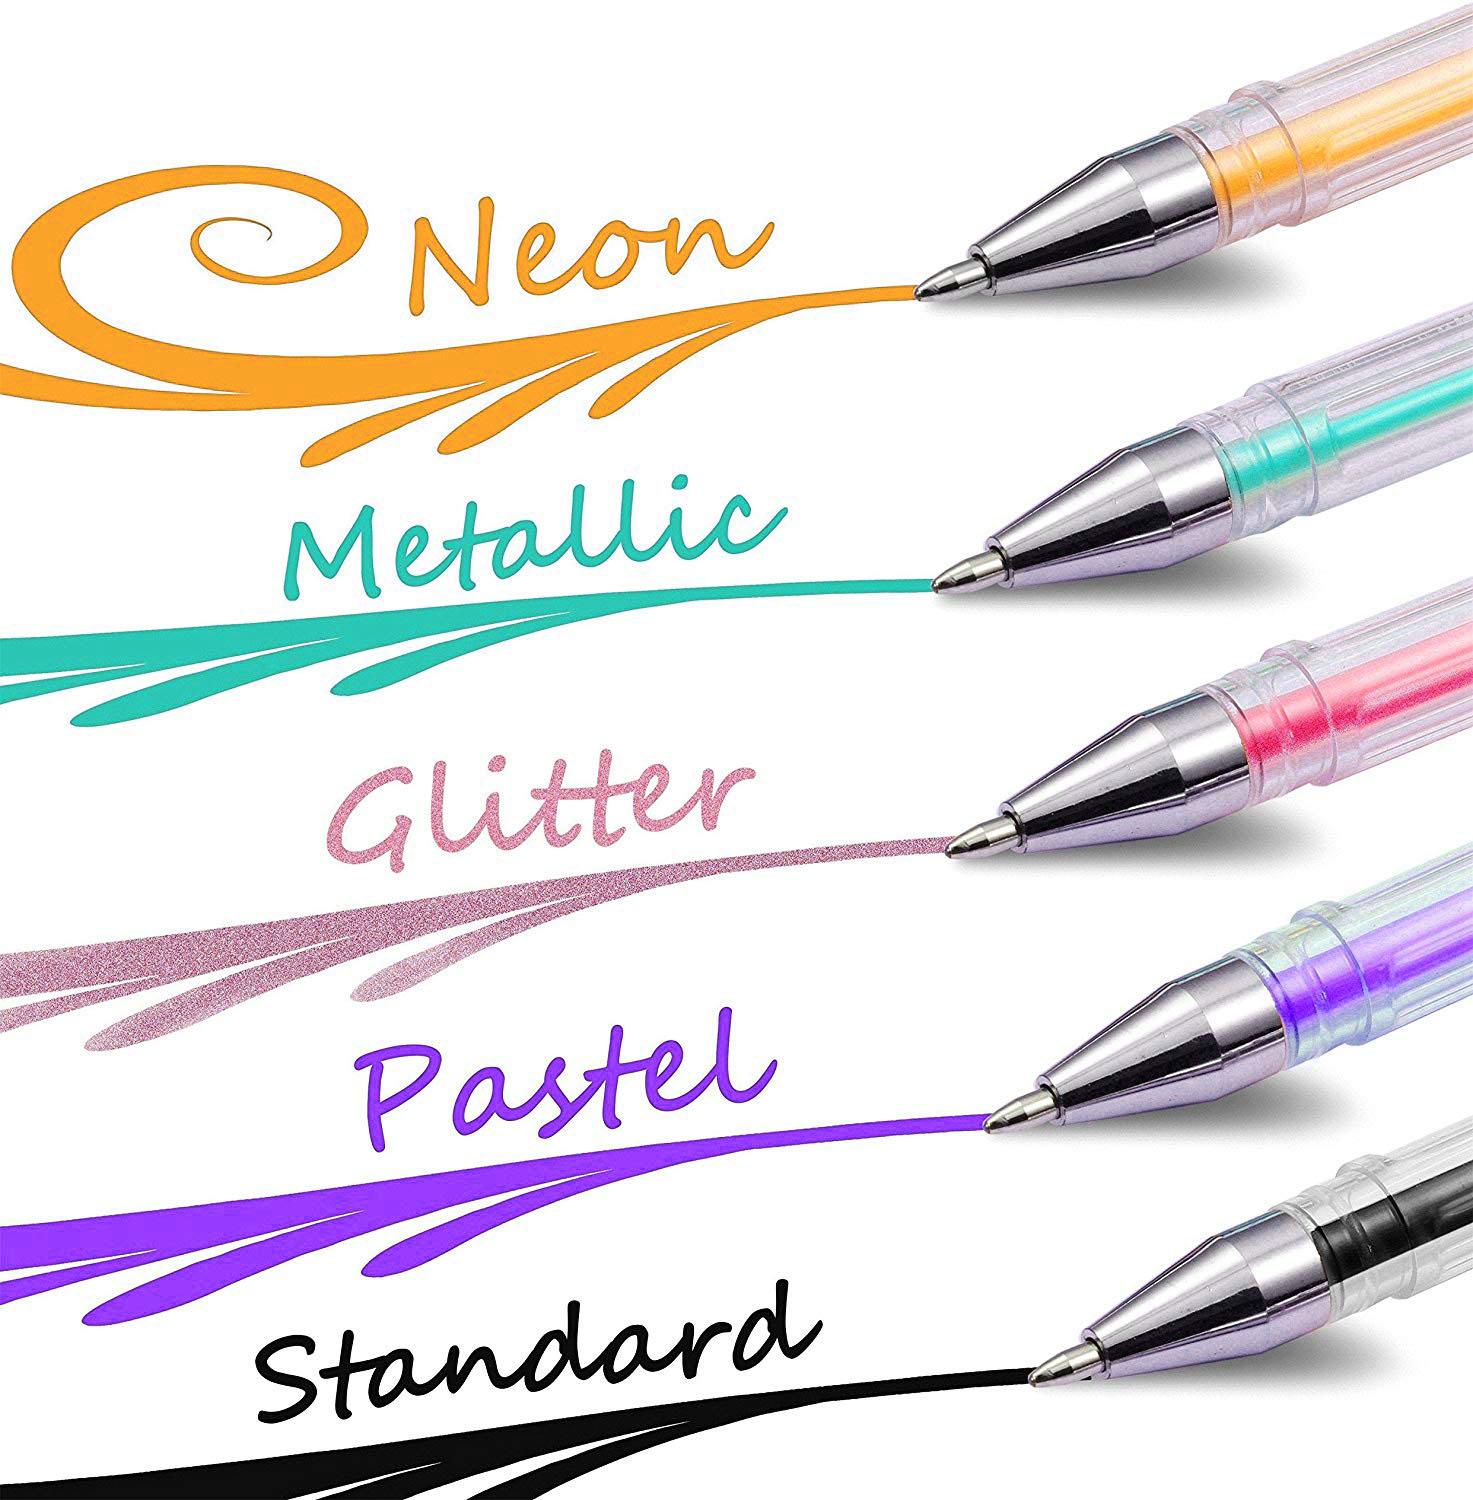 Colors Gel Pen Set 100 120 Colors For drawing Painting Sketching 0.5 mm Glitter Color Pen for School and Office Supplies